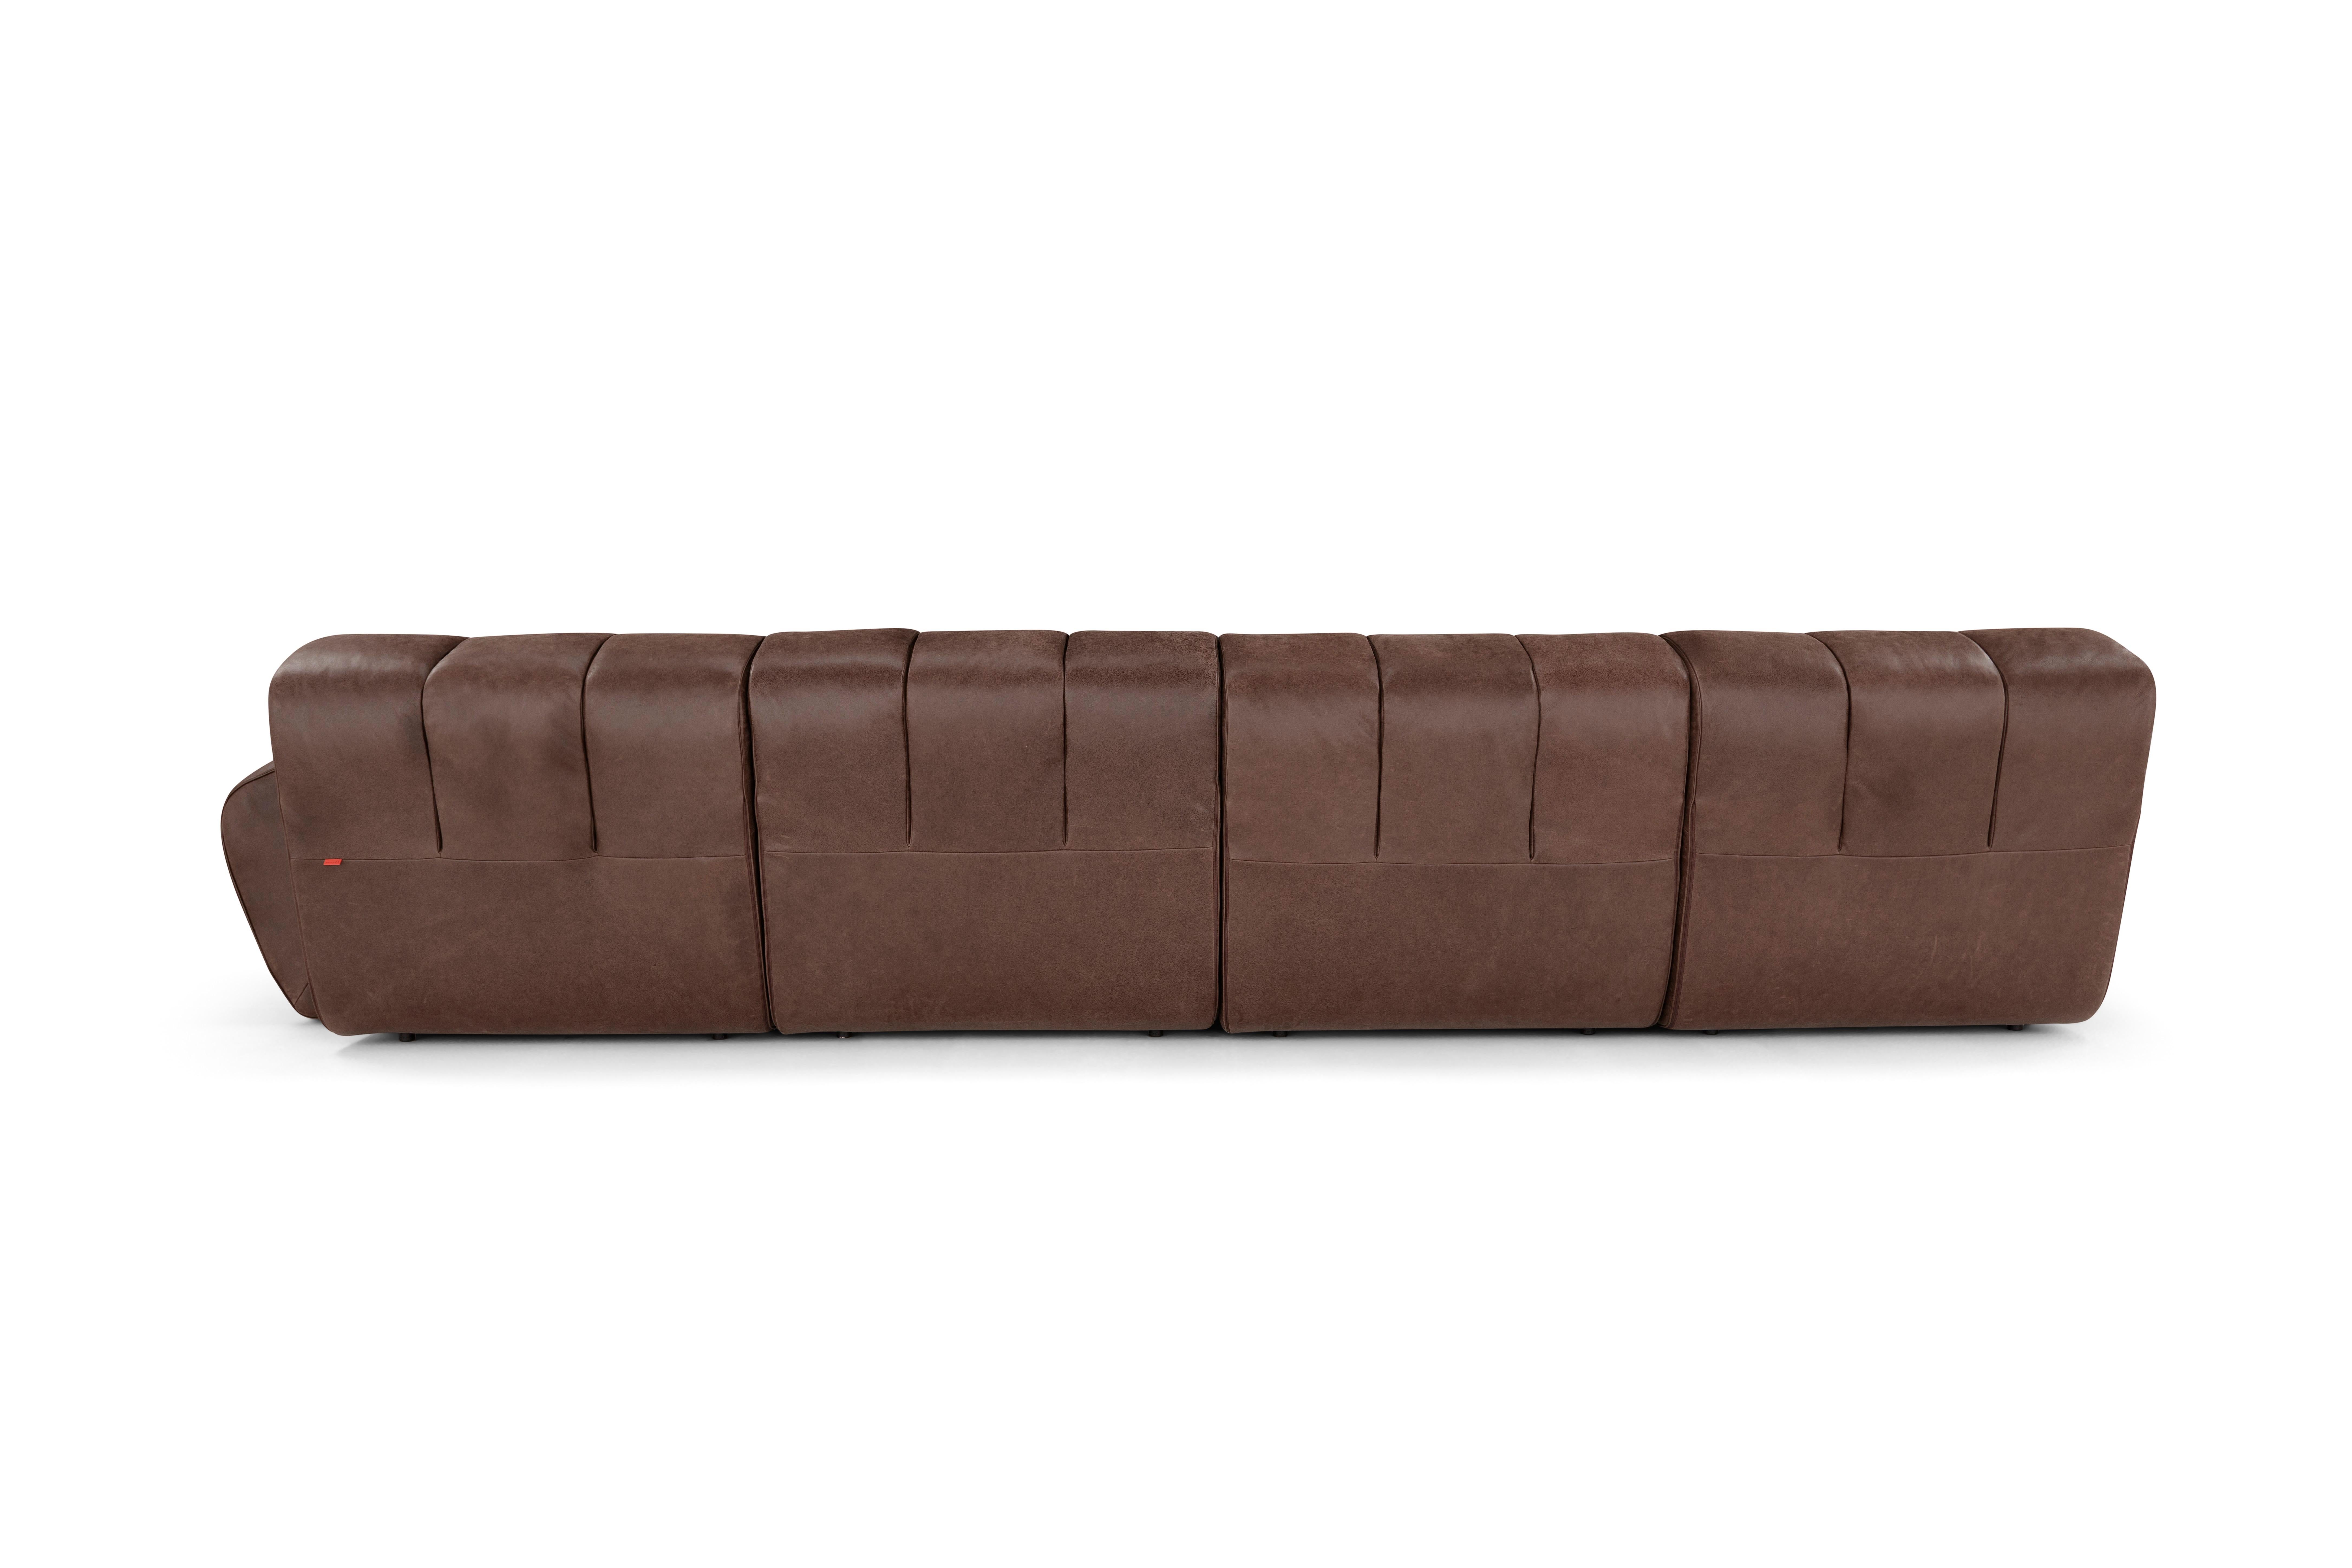 Contemporary Orange Sofa 'Palmo' by Amura Lab, Leather Old Velvet 2064 For Sale 11